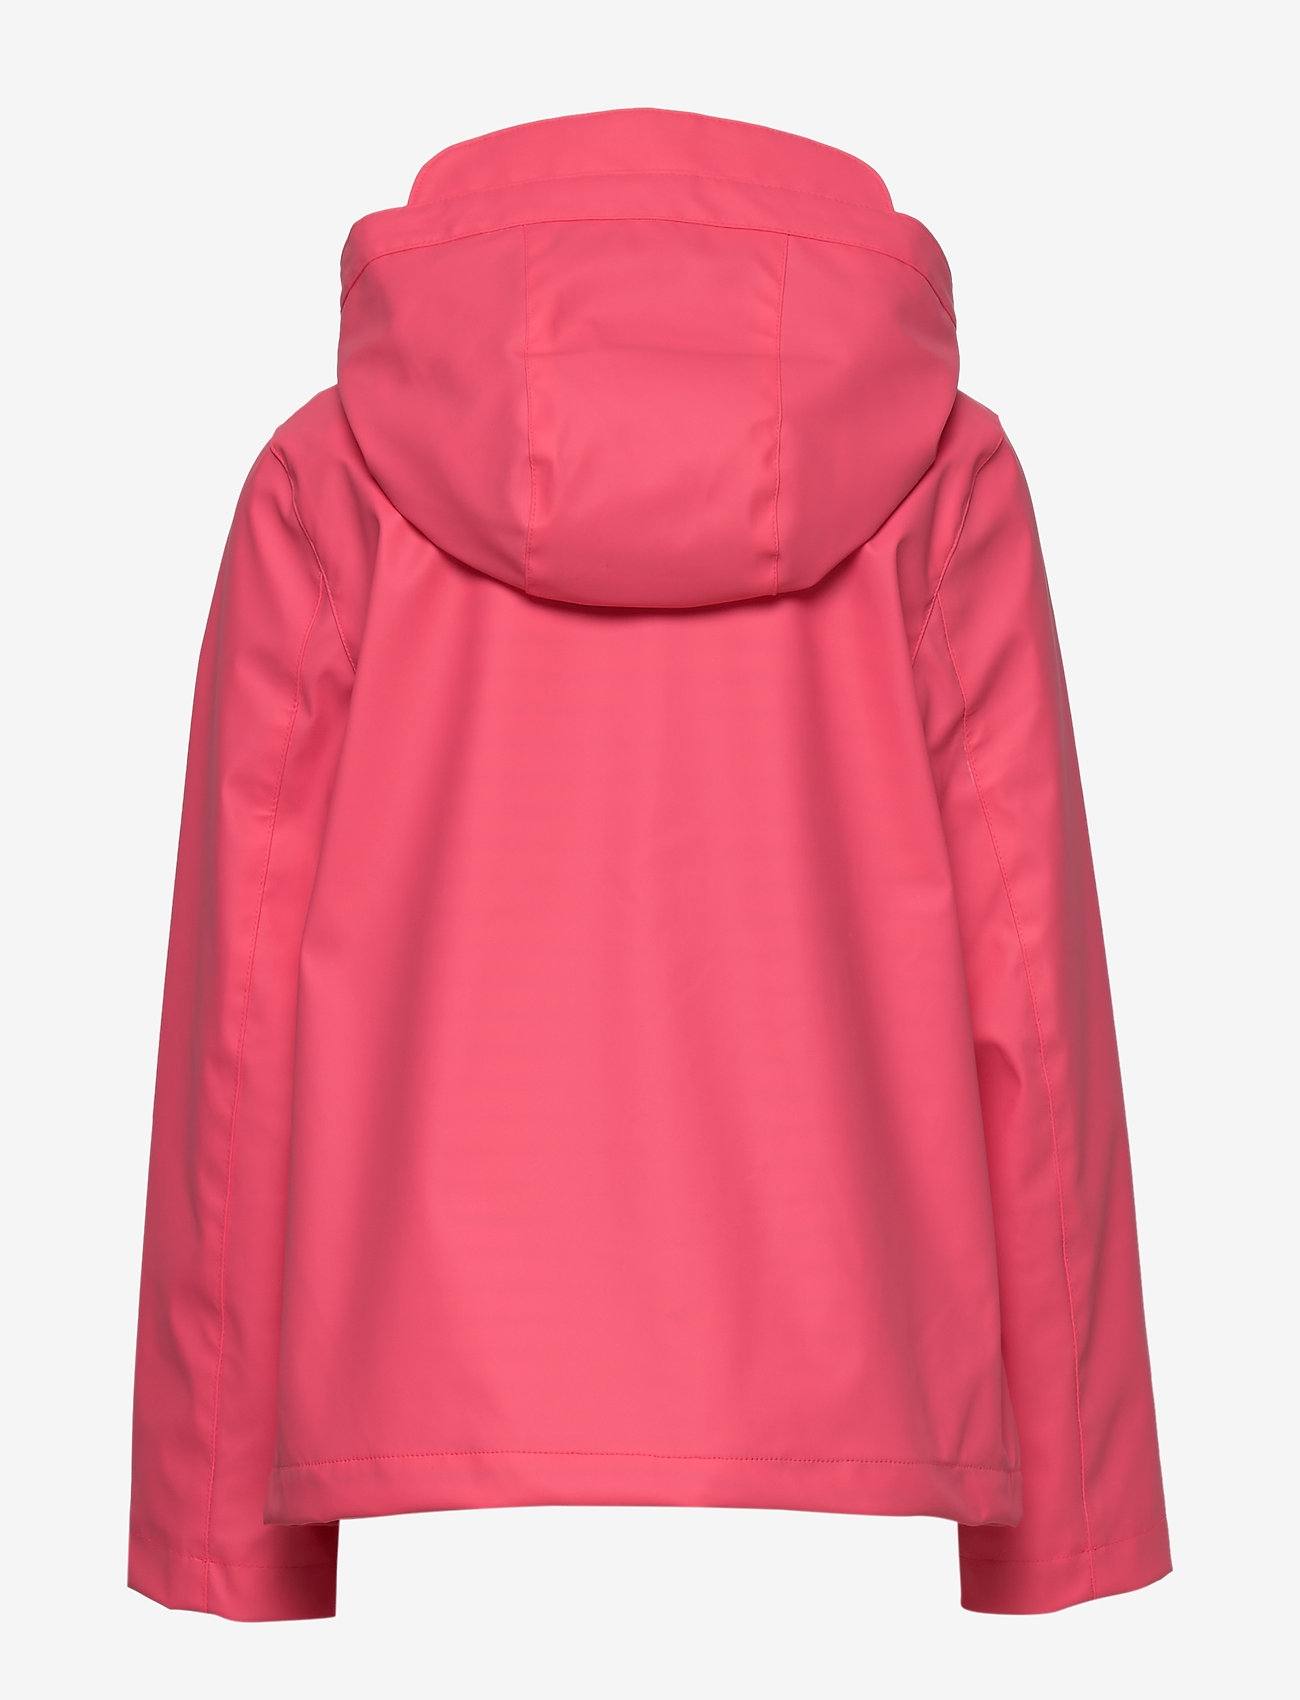 lined raincoat with hood